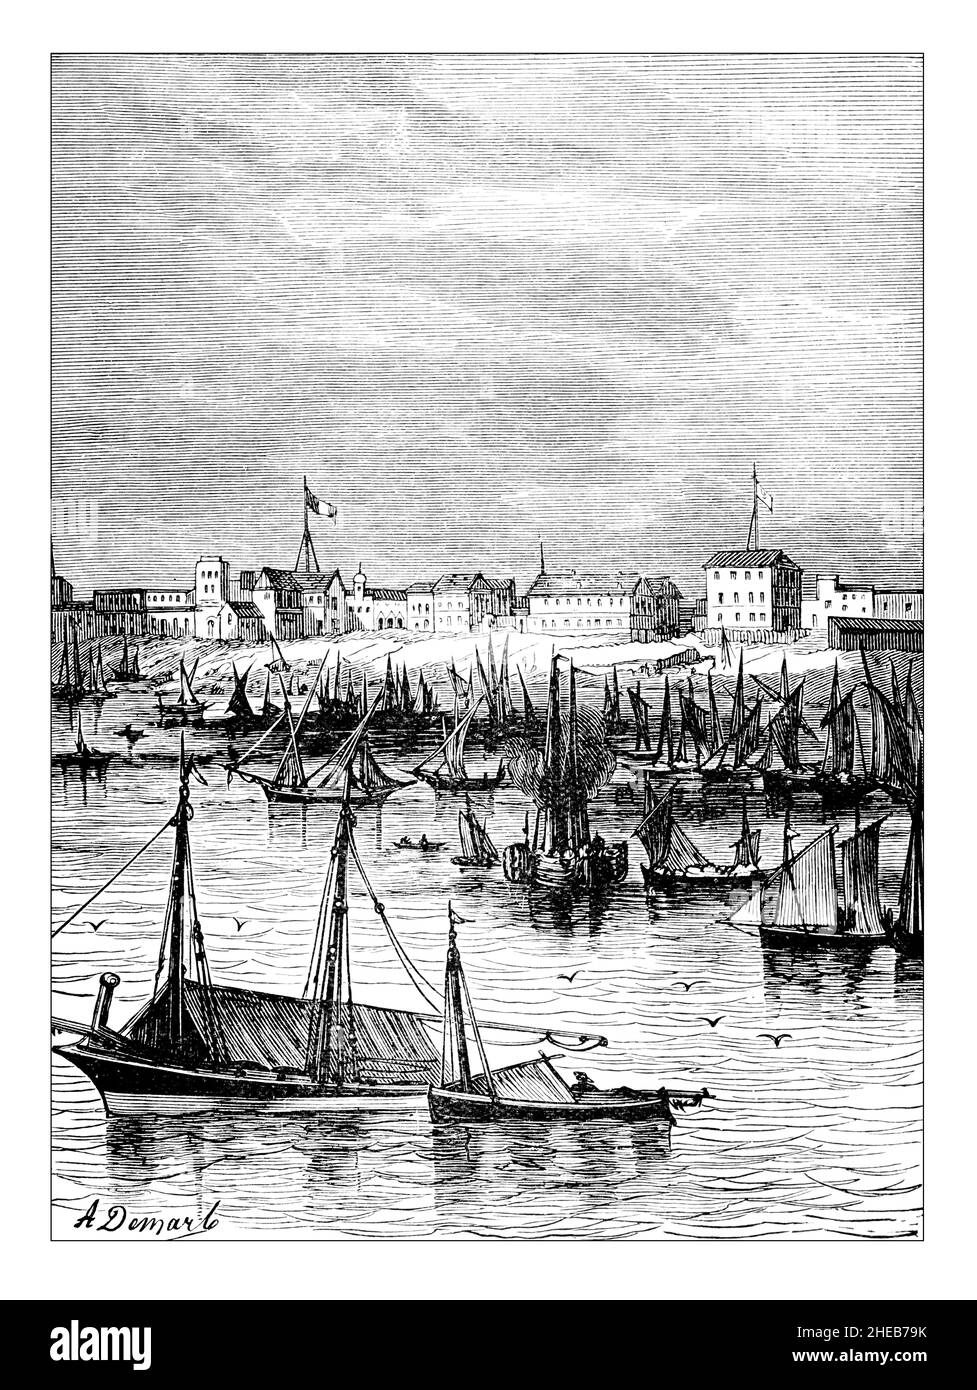 Zanzibar, engraved illustration from African Discovery and Adventure, by C E Bourne, published in 1900 by Swan Sonnenshein & Co, London Stock Photo